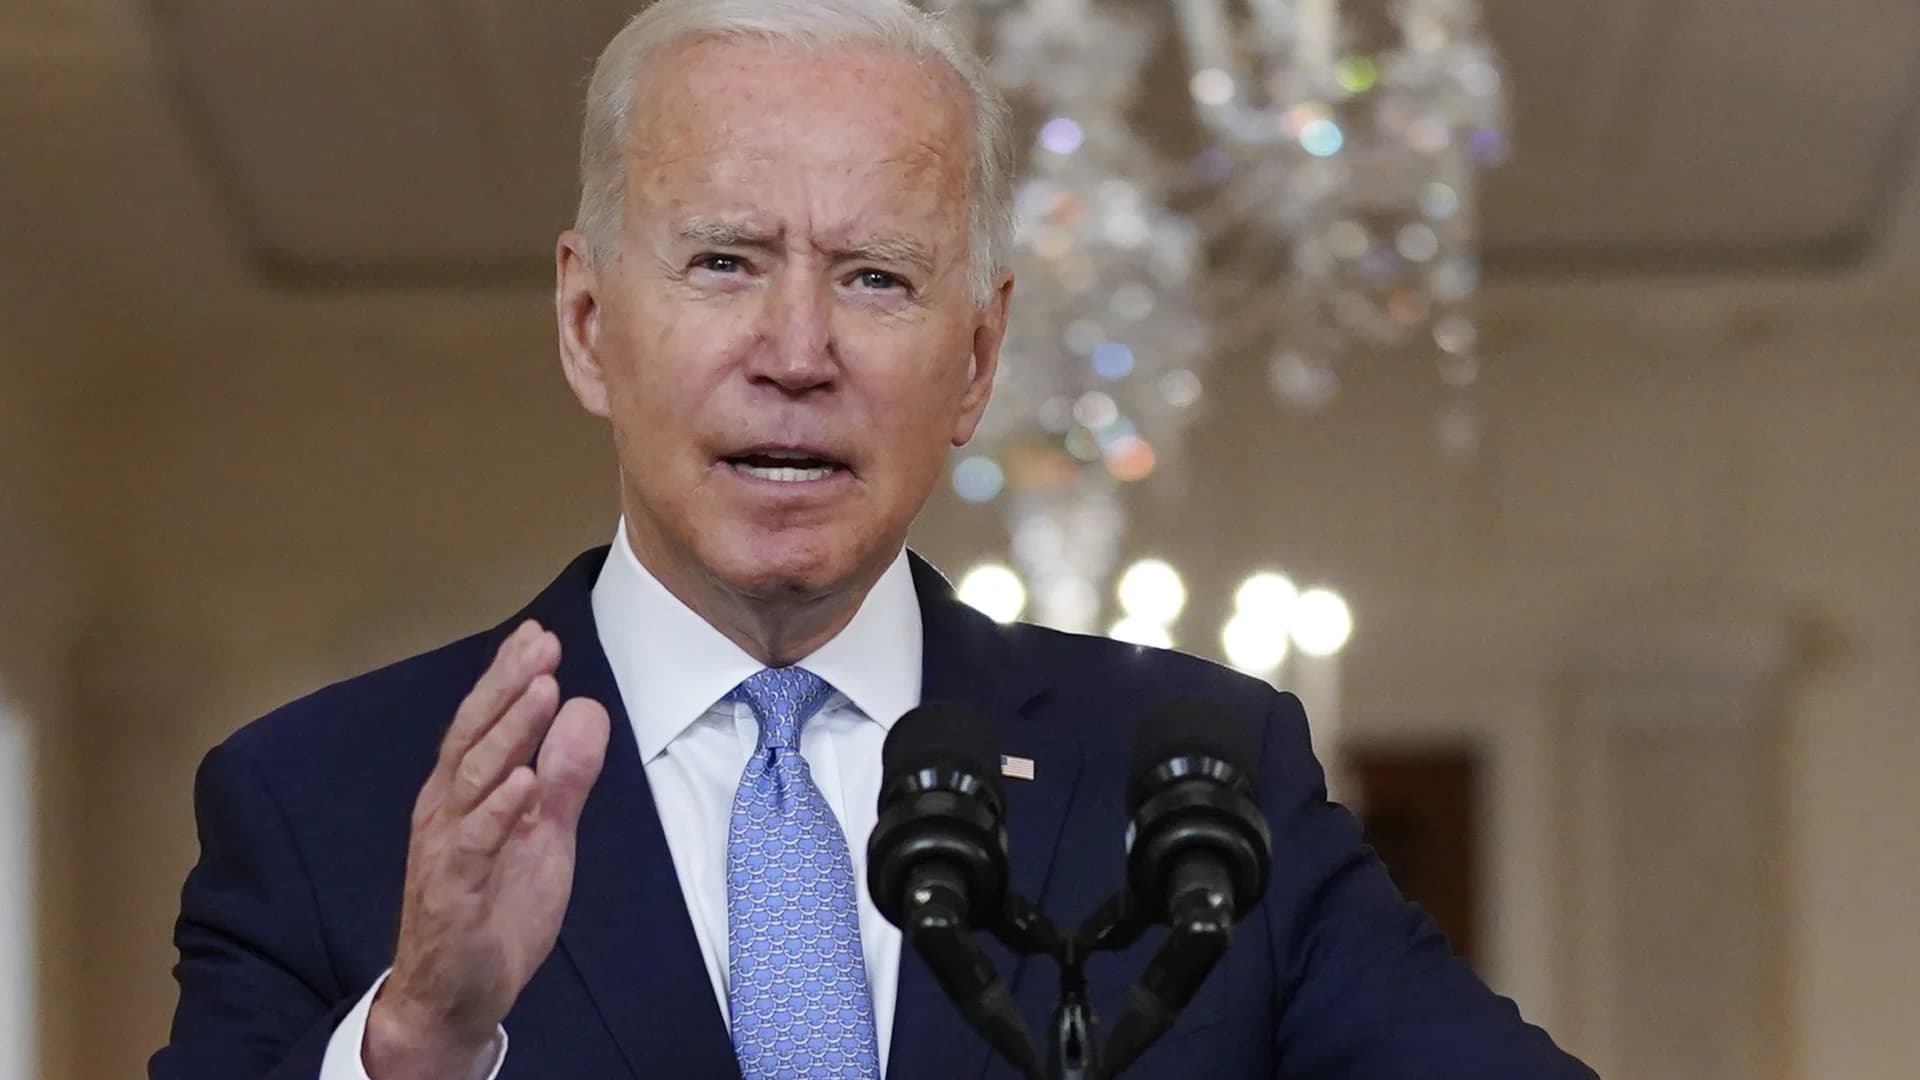 LIVE UPDATES: 'It was time to end this war,' Biden says about Afghanistan withdrawal